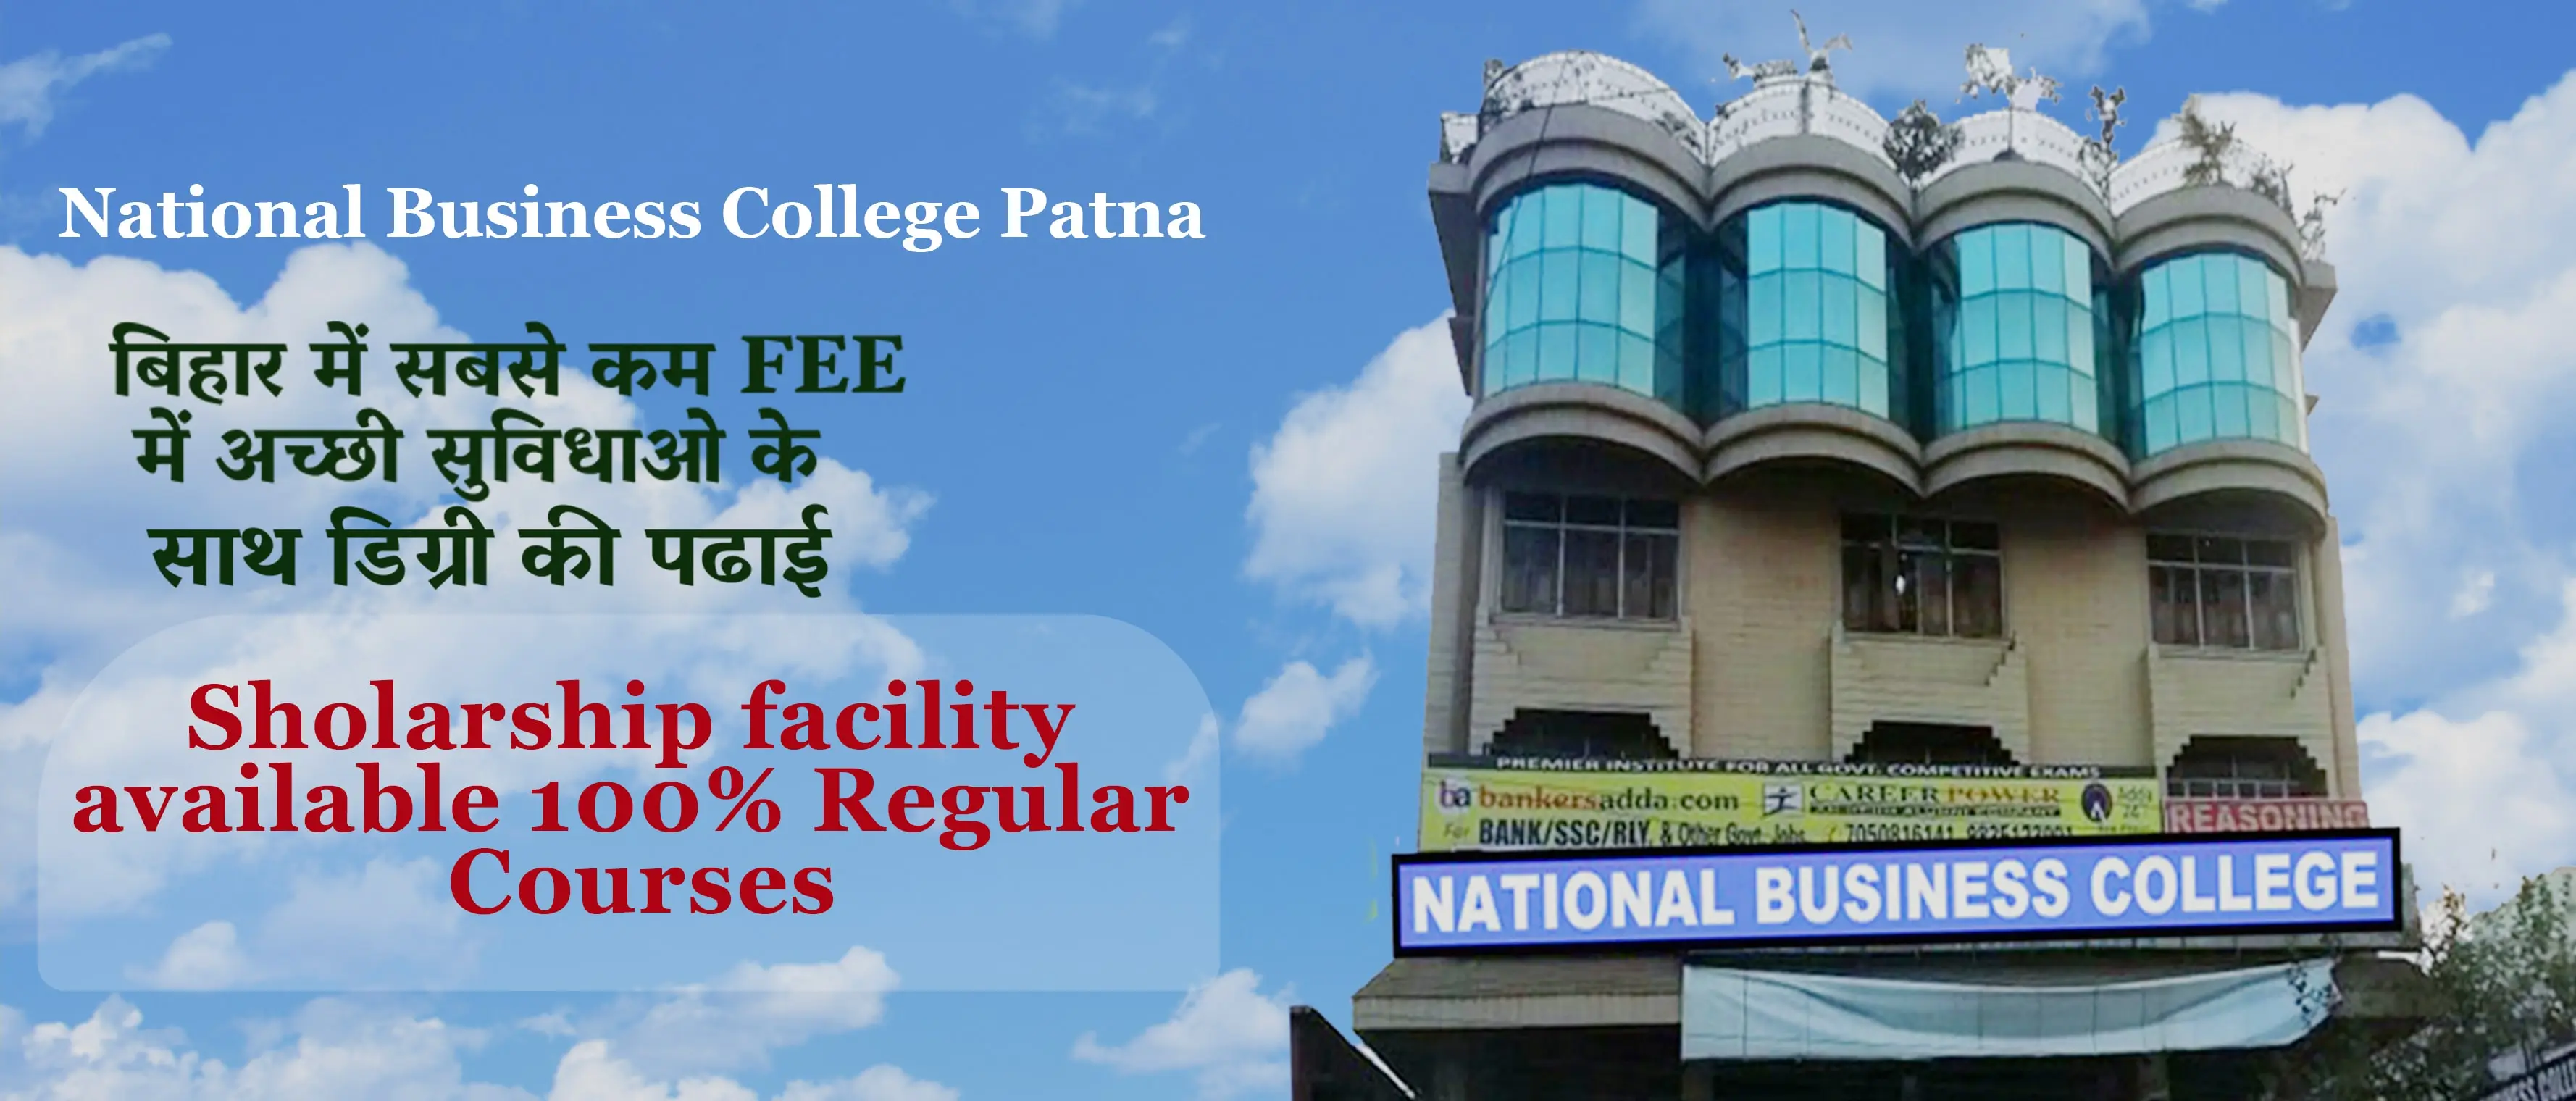 National Business College Patna